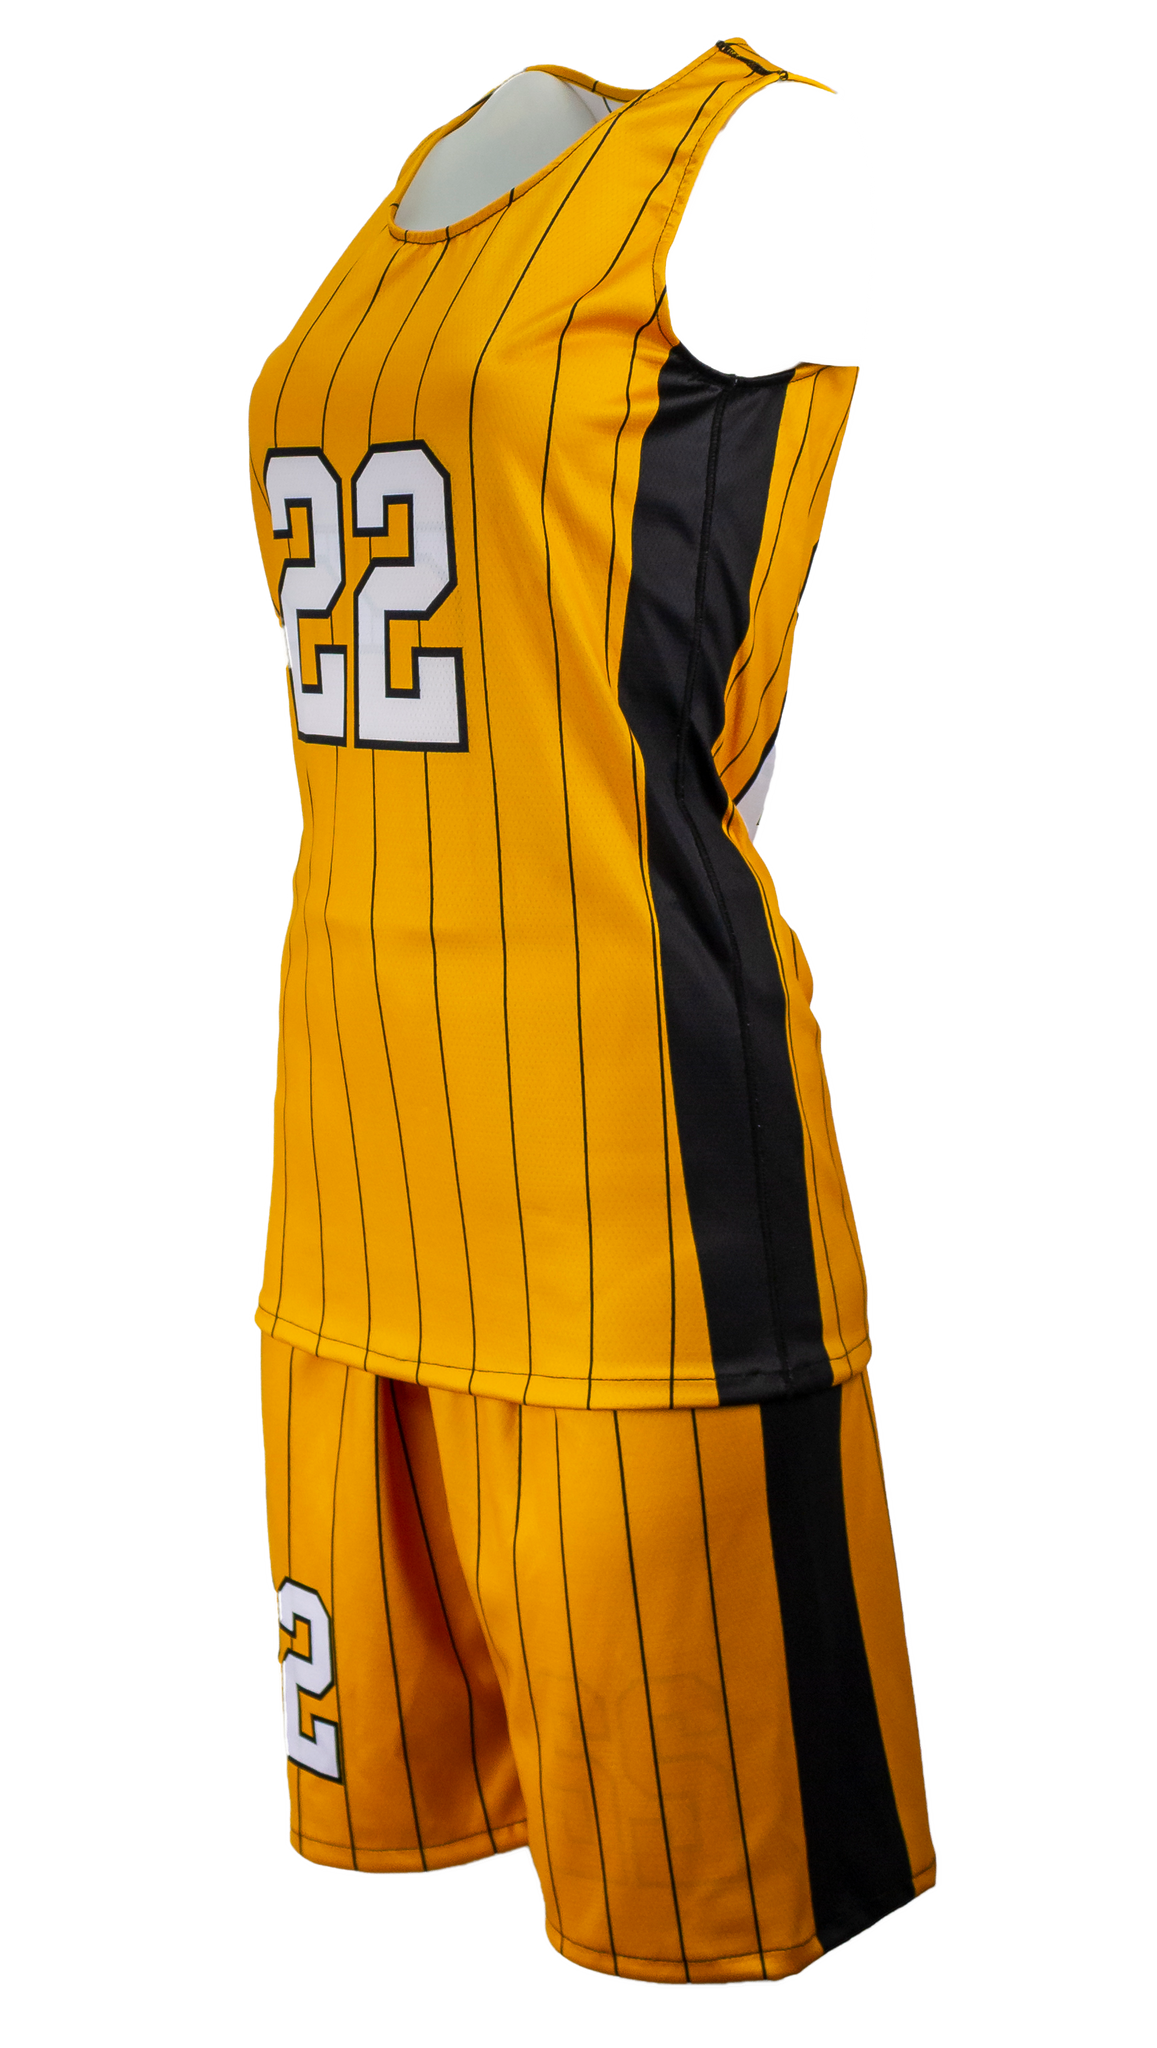 FitUSA Pinstripe REVERSIBLE Sublimated Women's Basketball Jersey